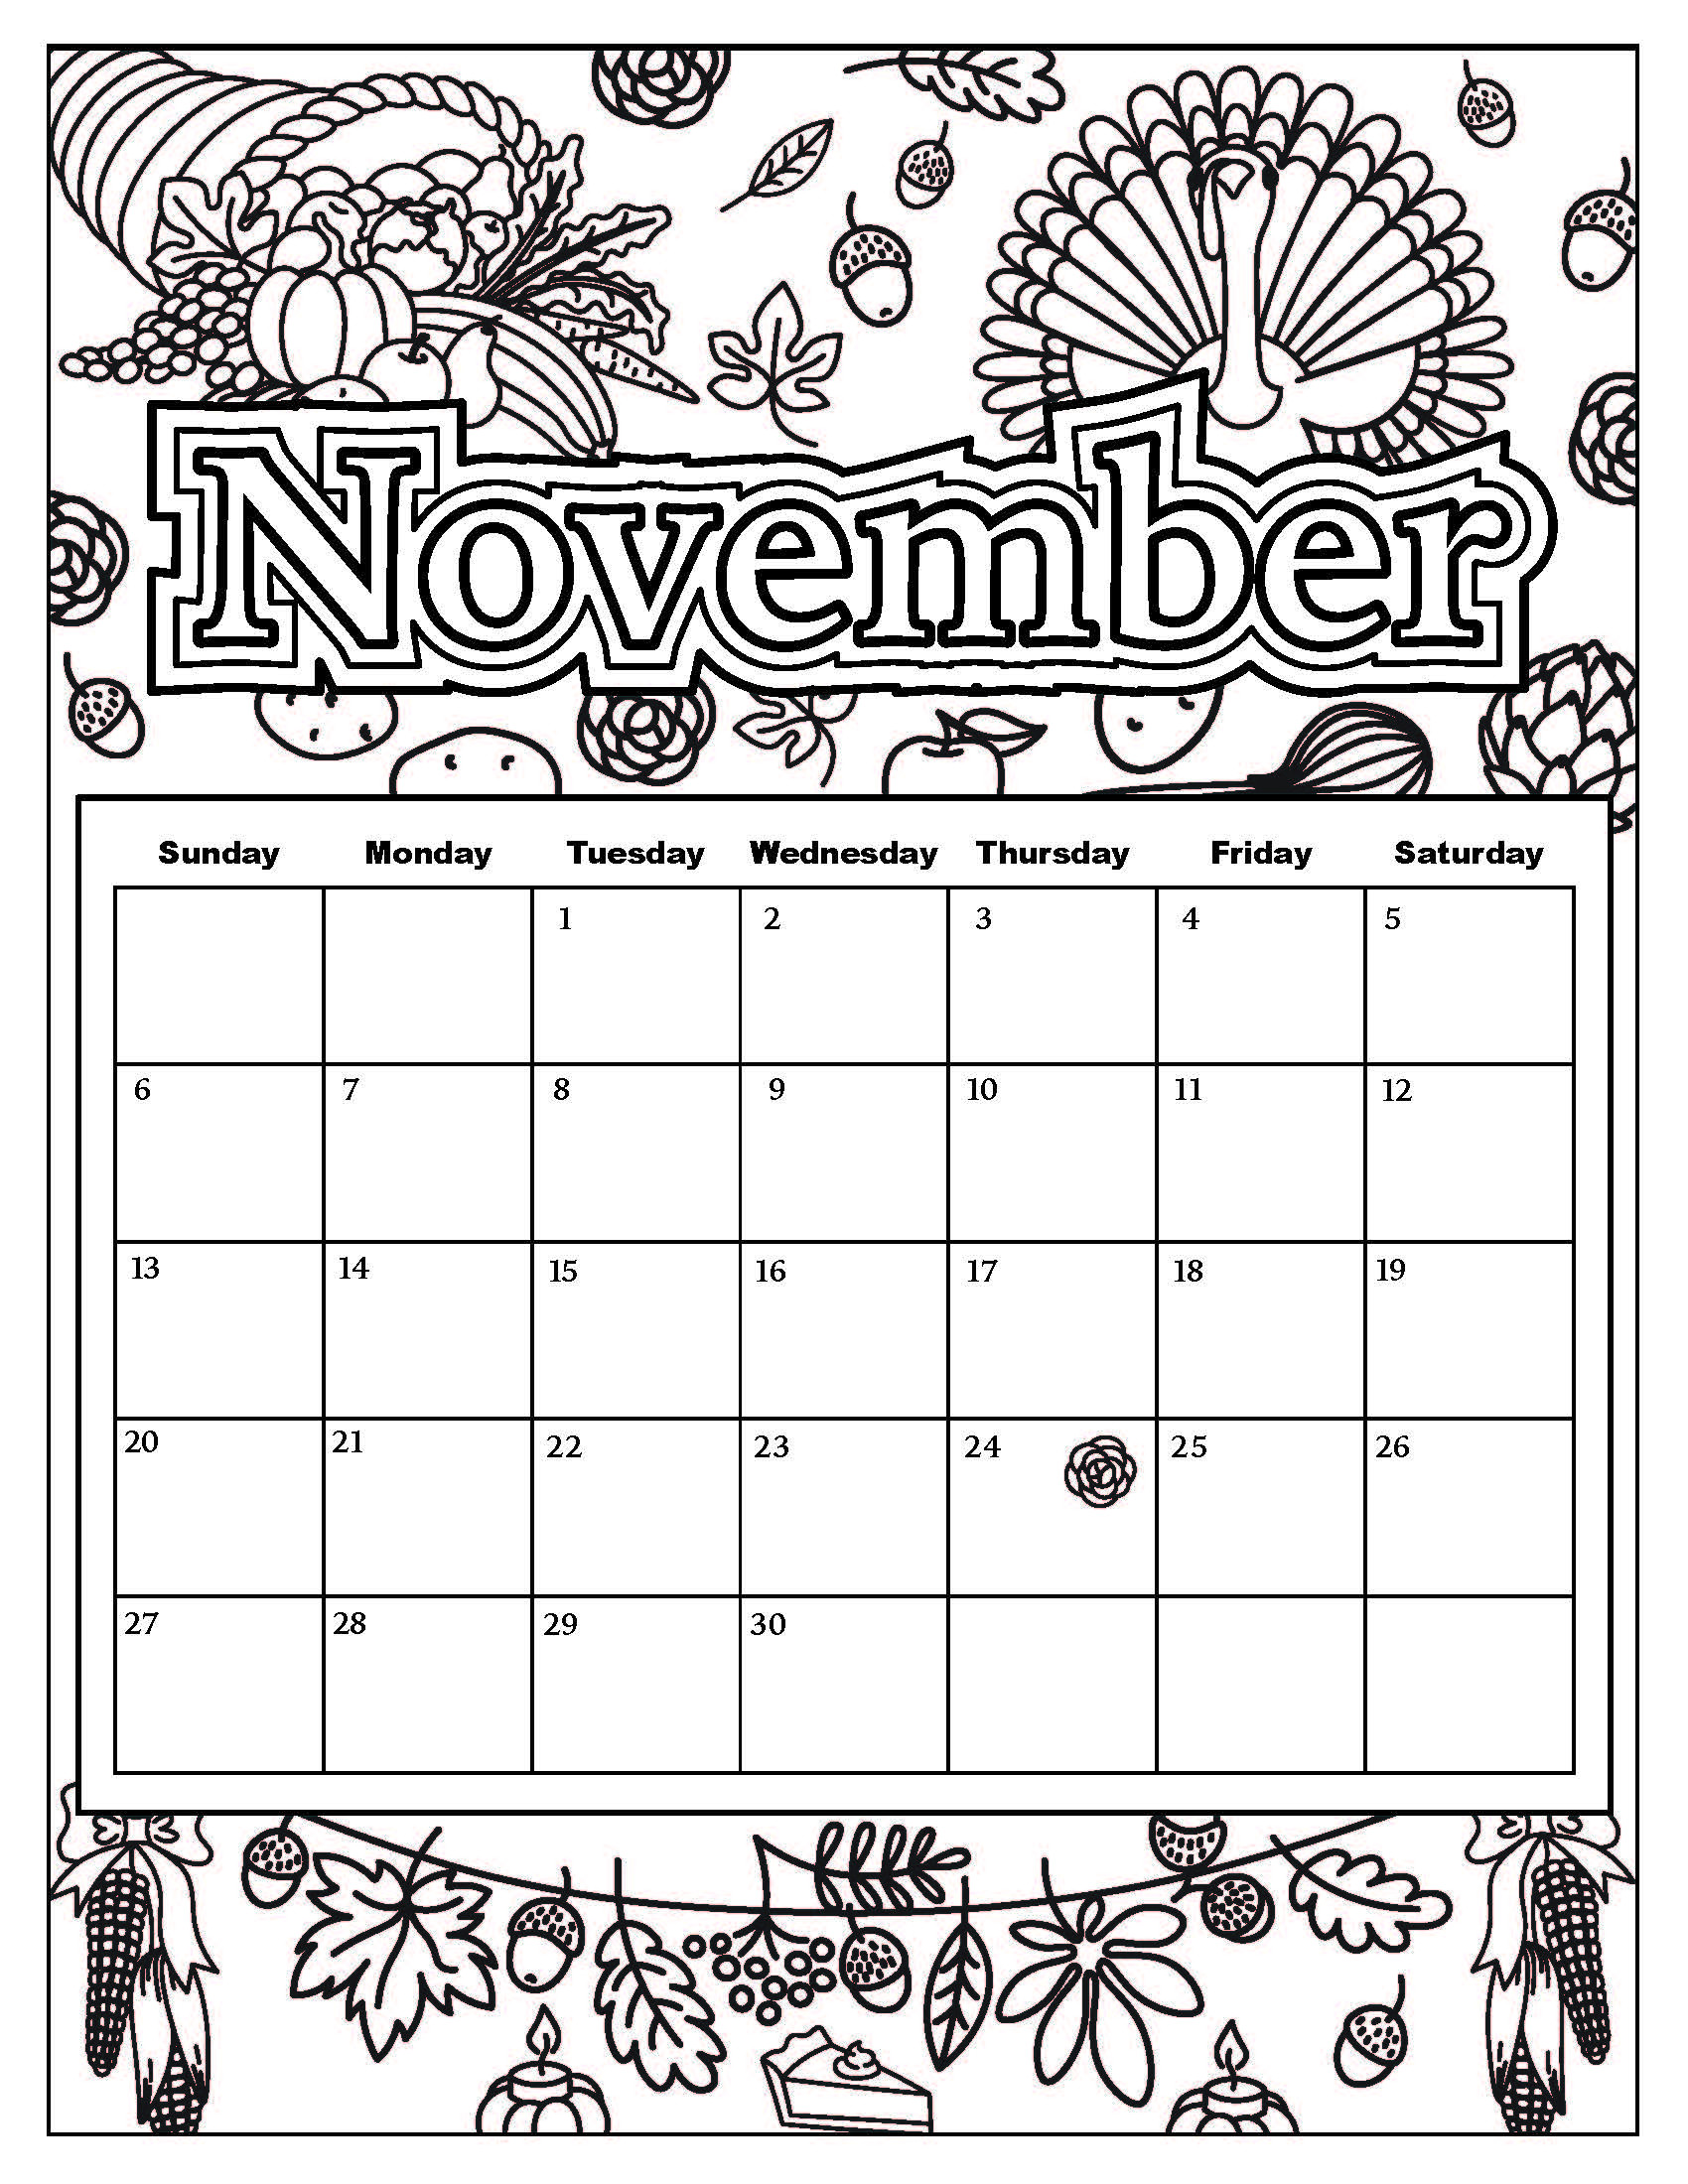 2024 Summer Calendar Coloring Pages For Kids Beth Marisa